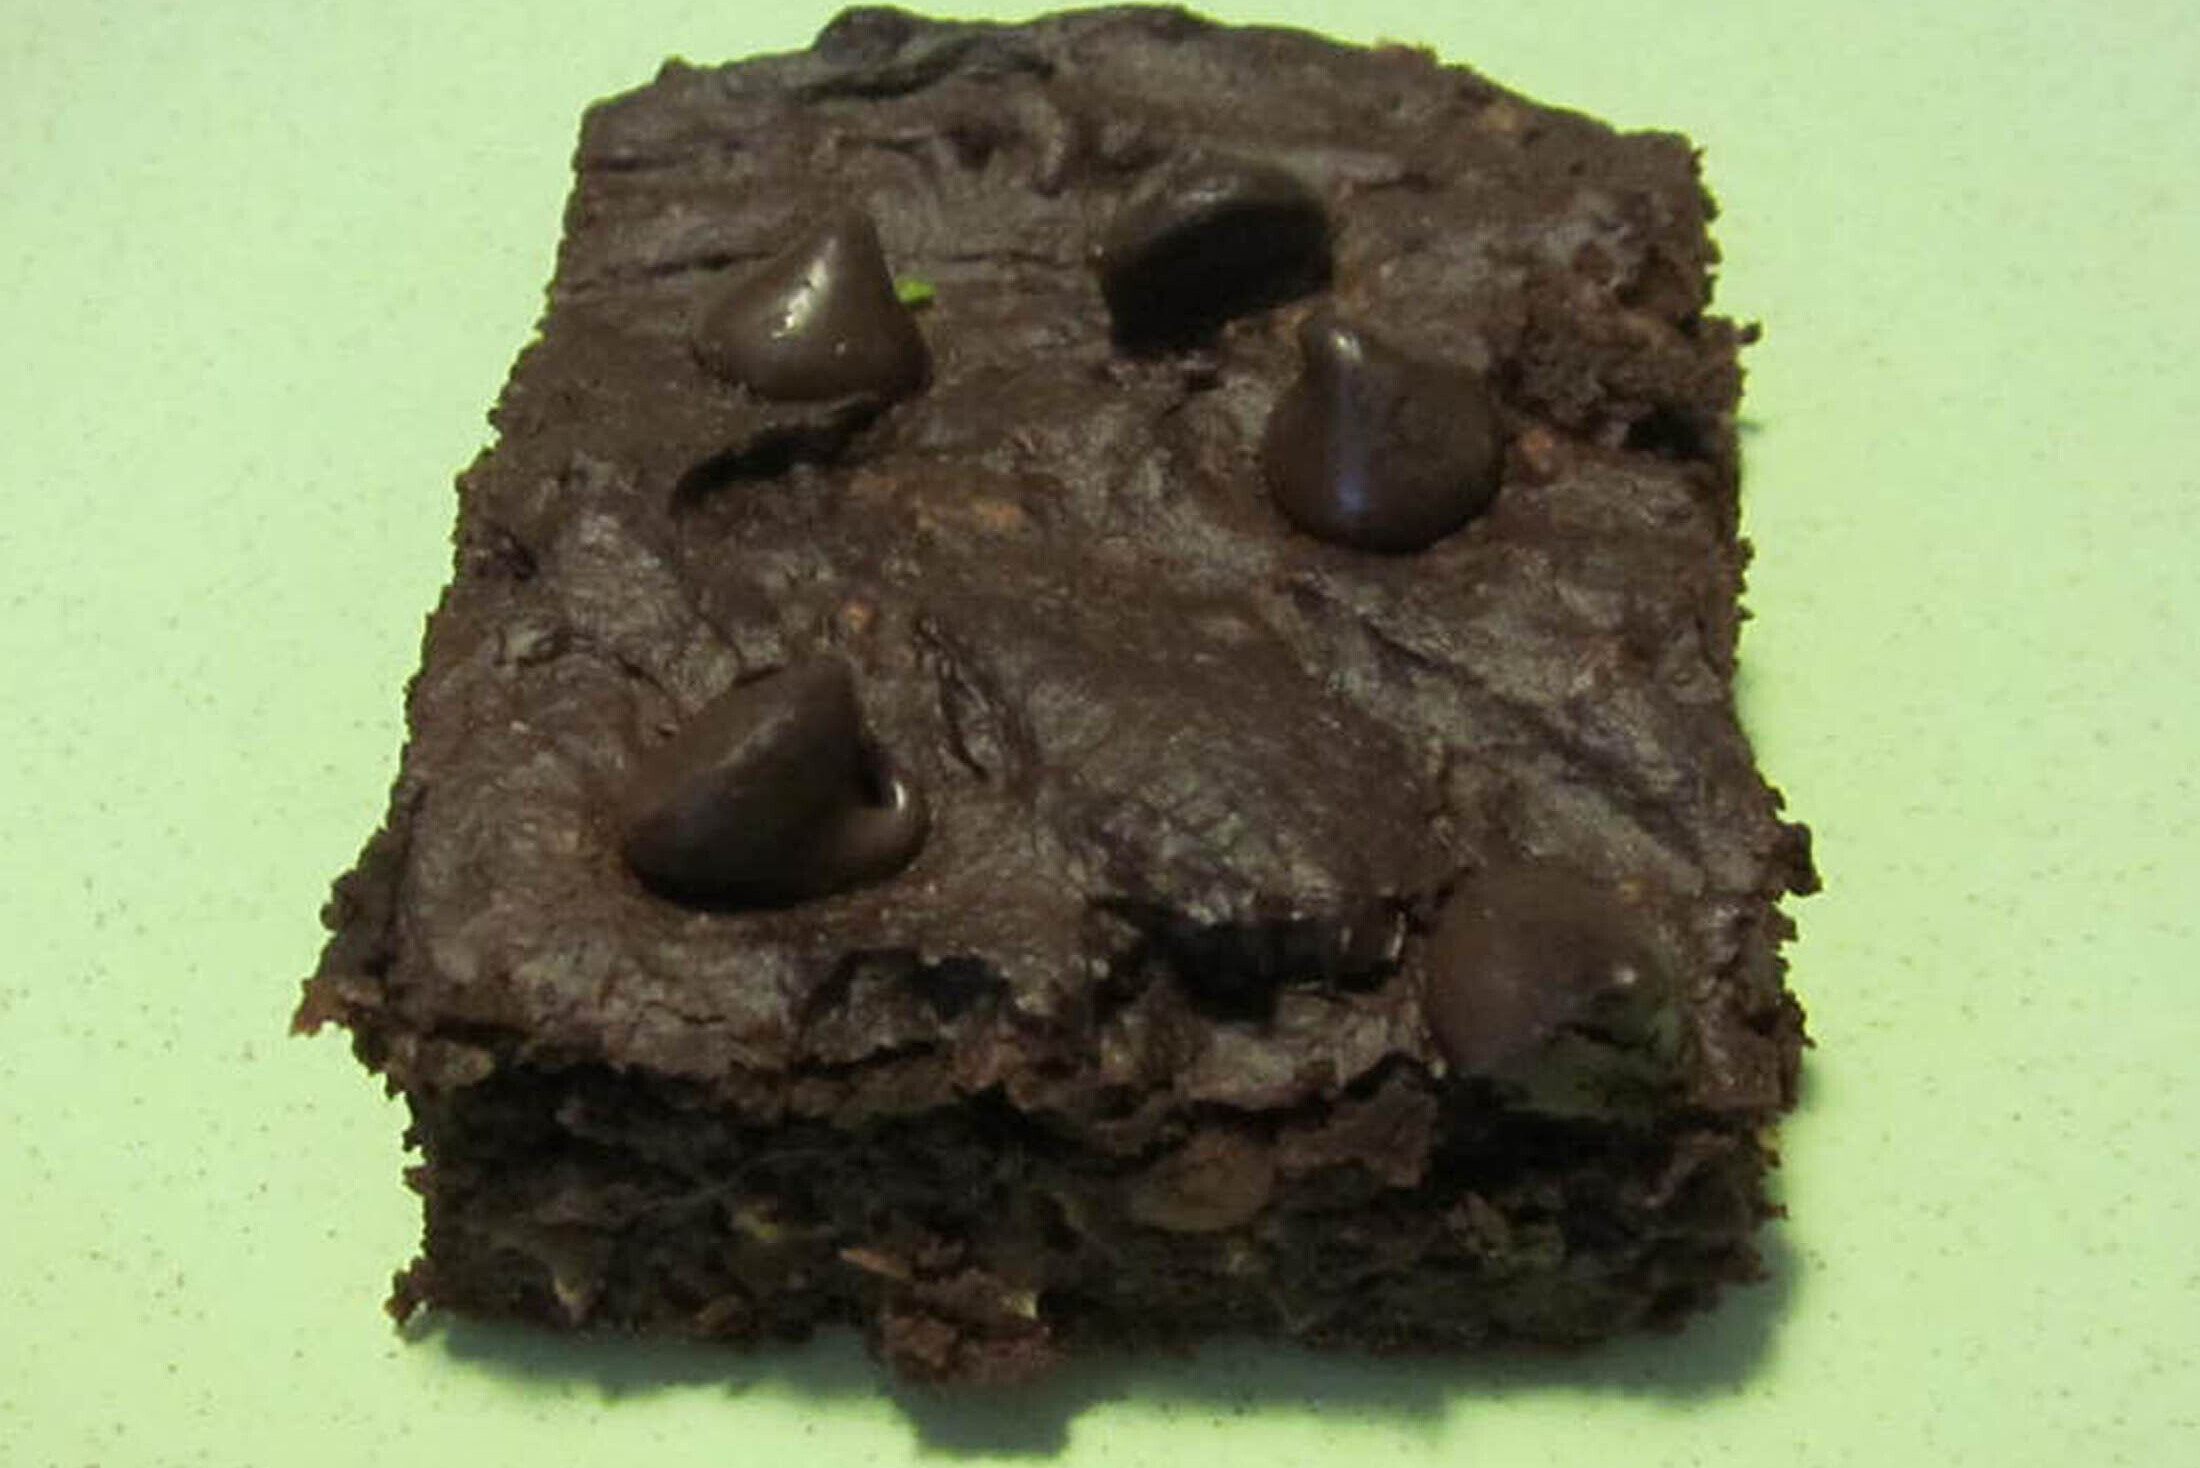 Chocolate chip brownie on a green plate